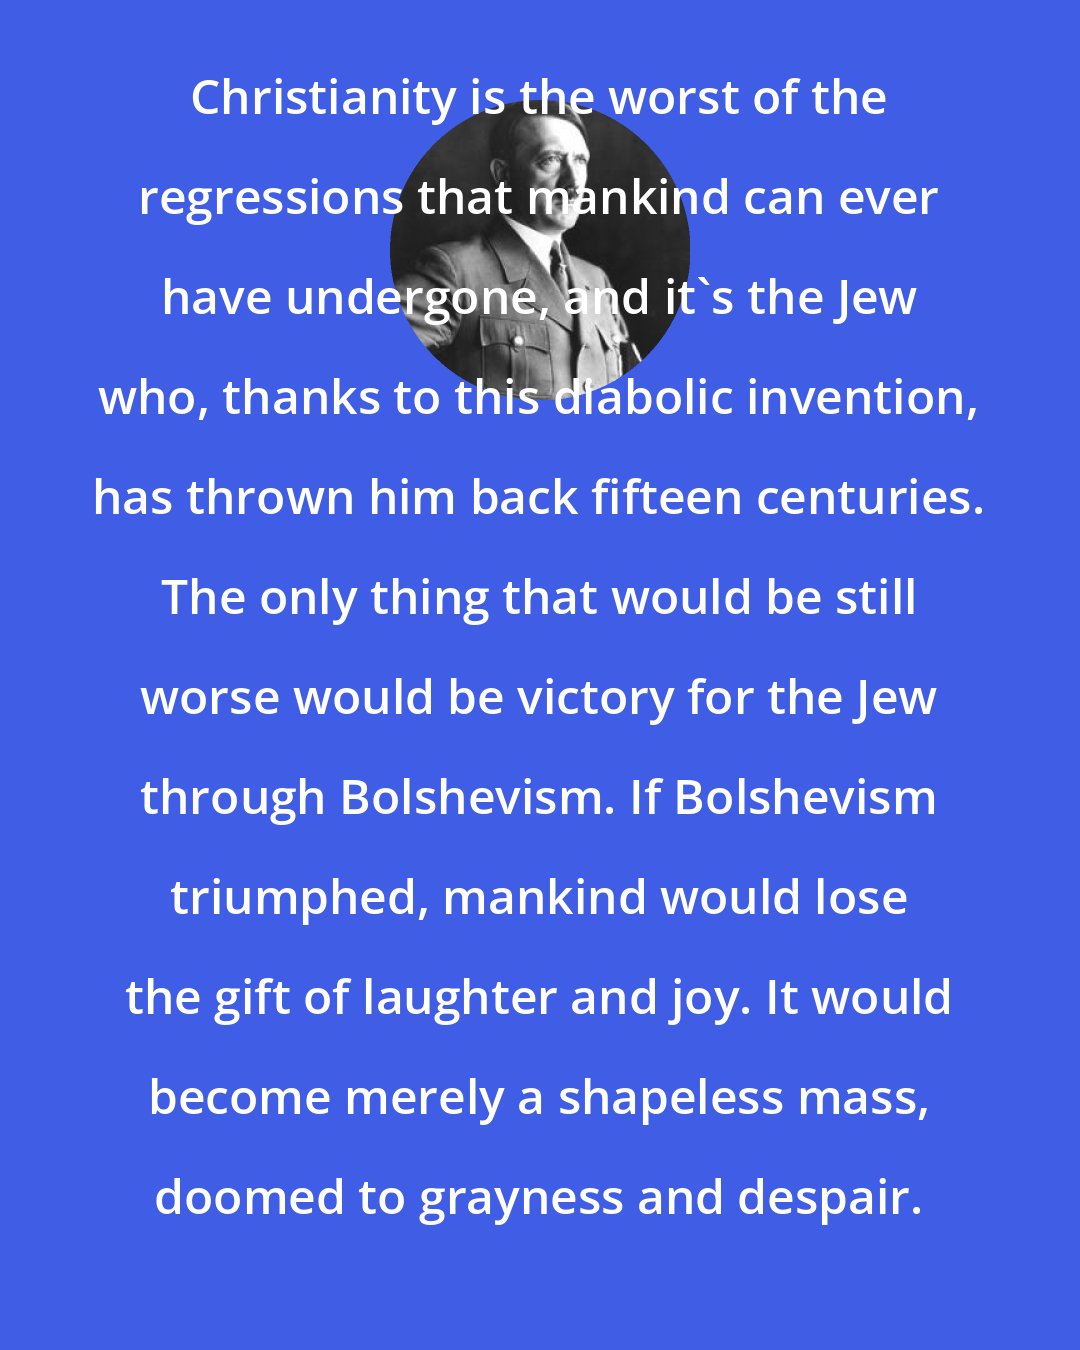 Adolf Hitler: Christianity is the worst of the regressions that mankind can ever have undergone, and it's the Jew who, thanks to this diabolic invention, has thrown him back fifteen centuries. The only thing that would be still worse would be victory for the Jew through Bolshevism. If Bolshevism triumphed, mankind would lose the gift of laughter and joy. It would become merely a shapeless mass, doomed to grayness and despair.